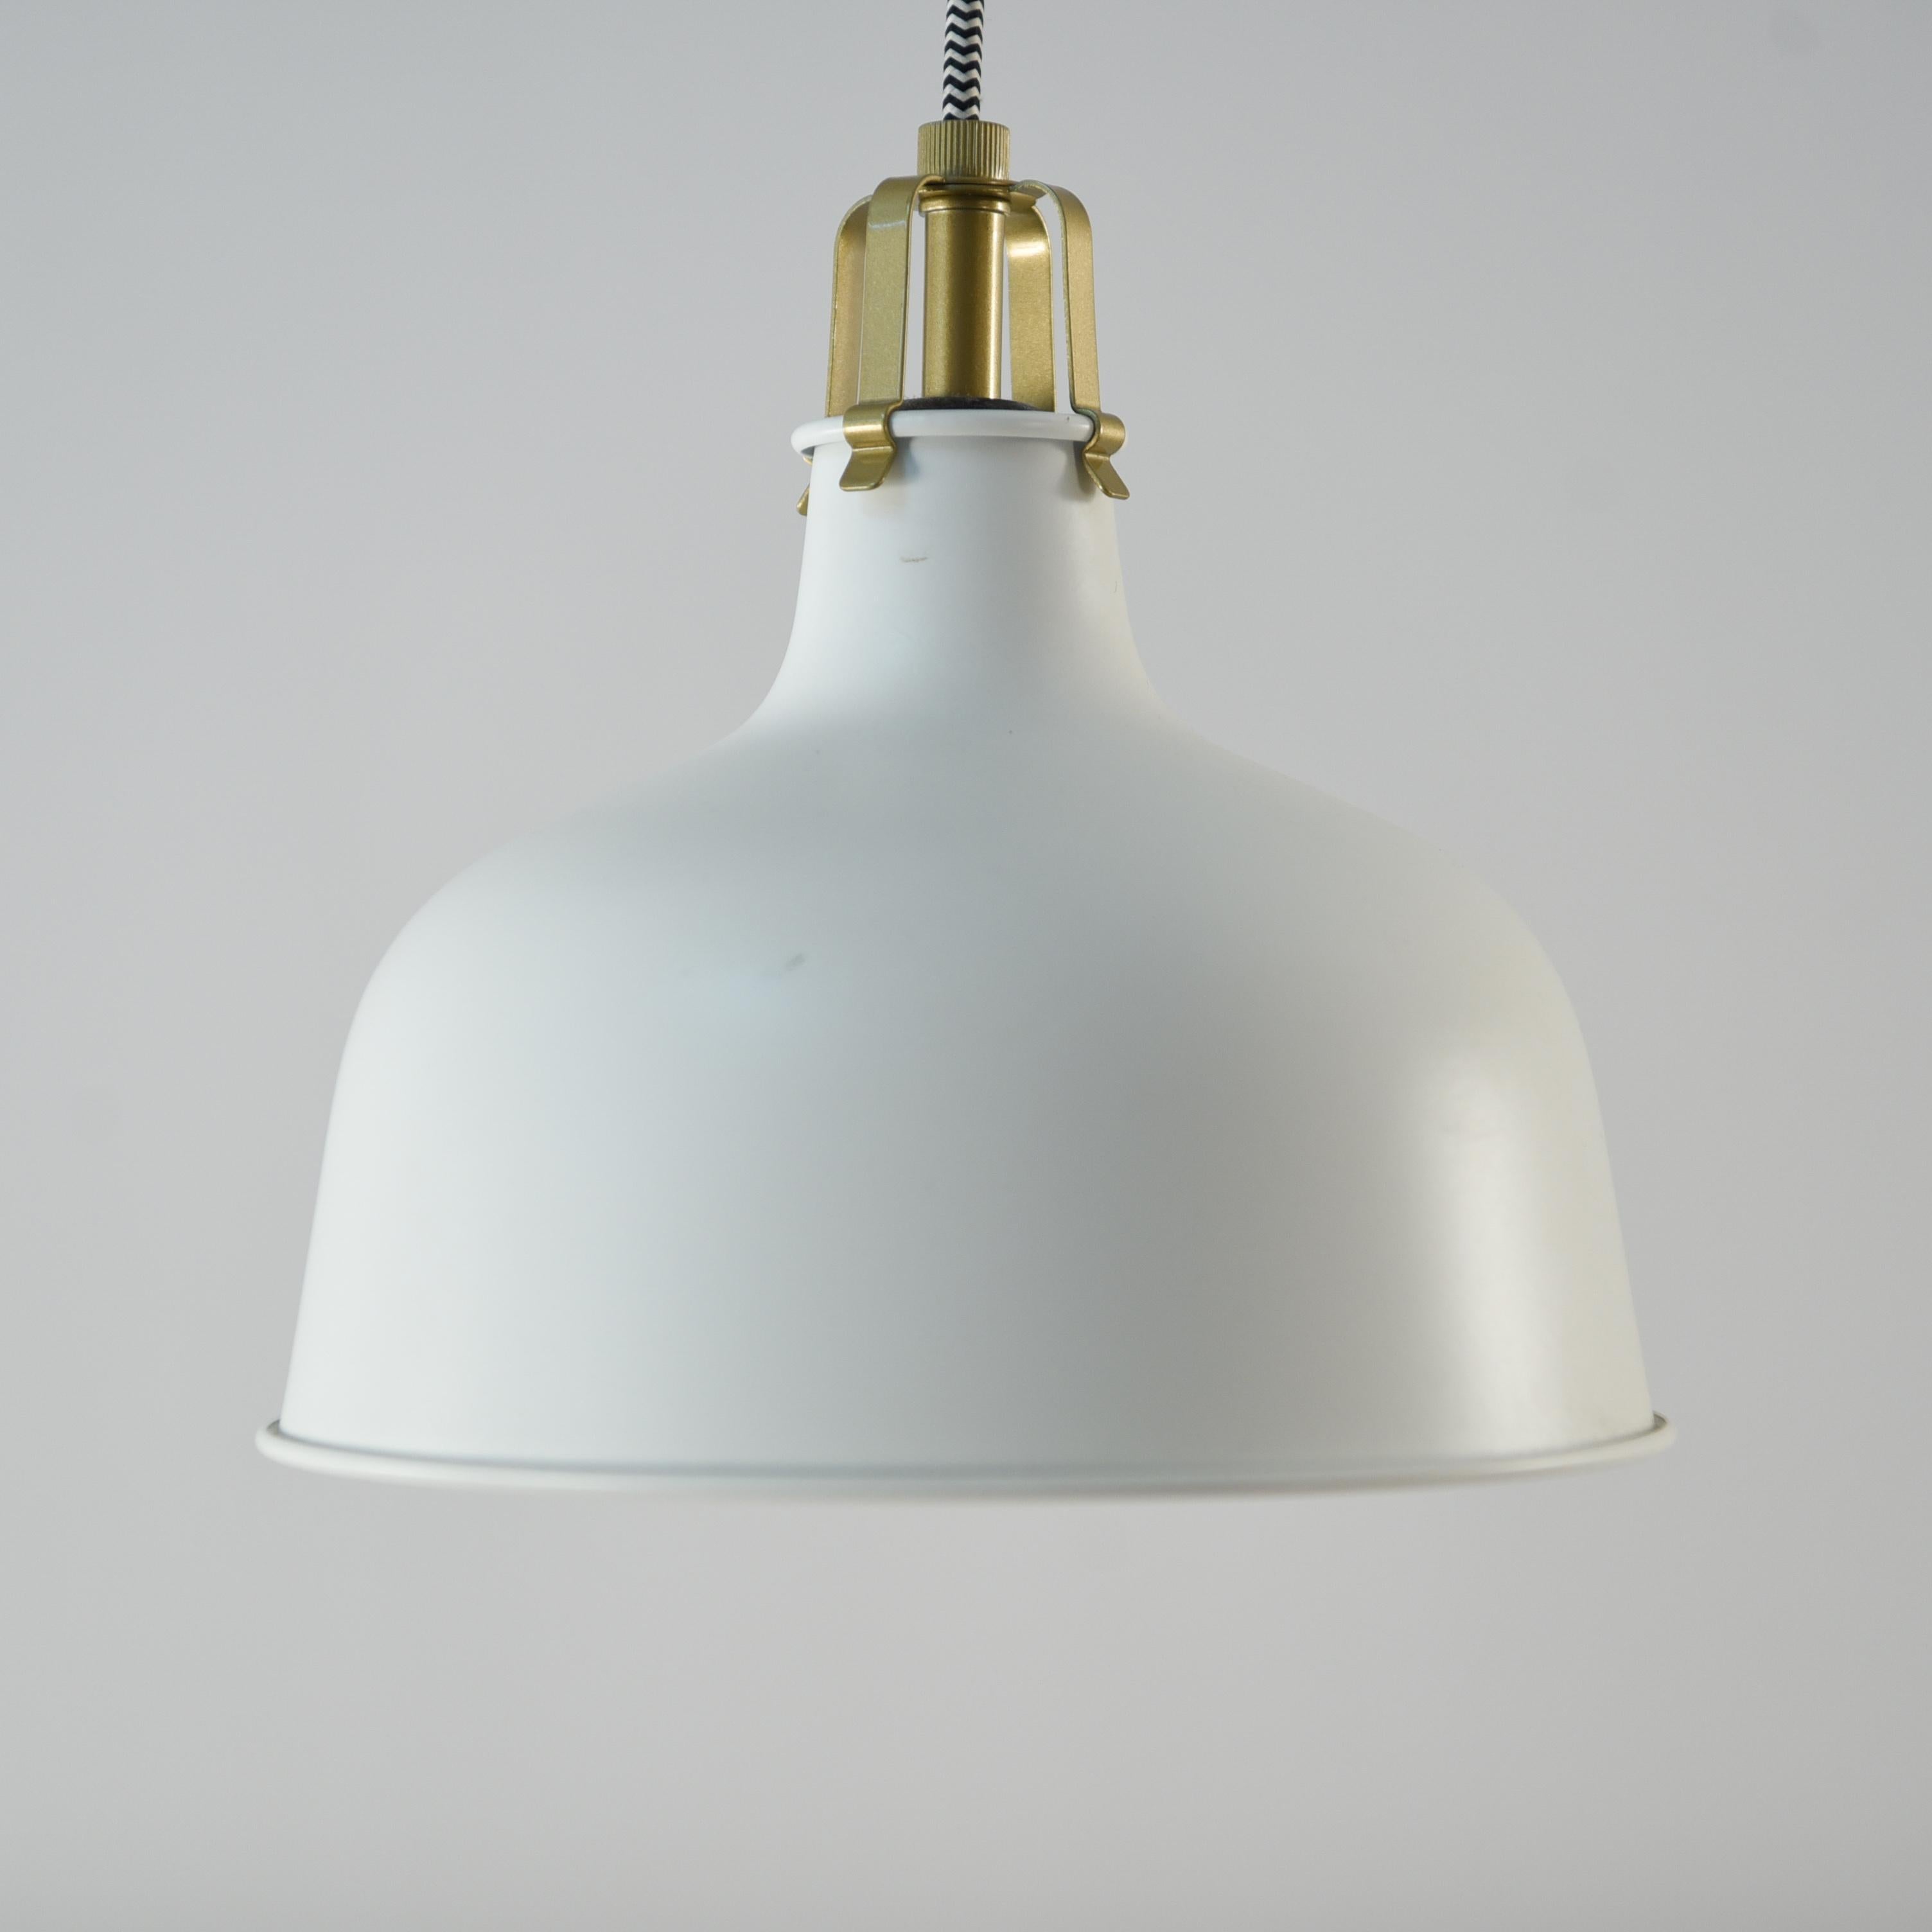 This Swedish pendant light is a classic bell form in white. This piece has a versatile, timeless design.